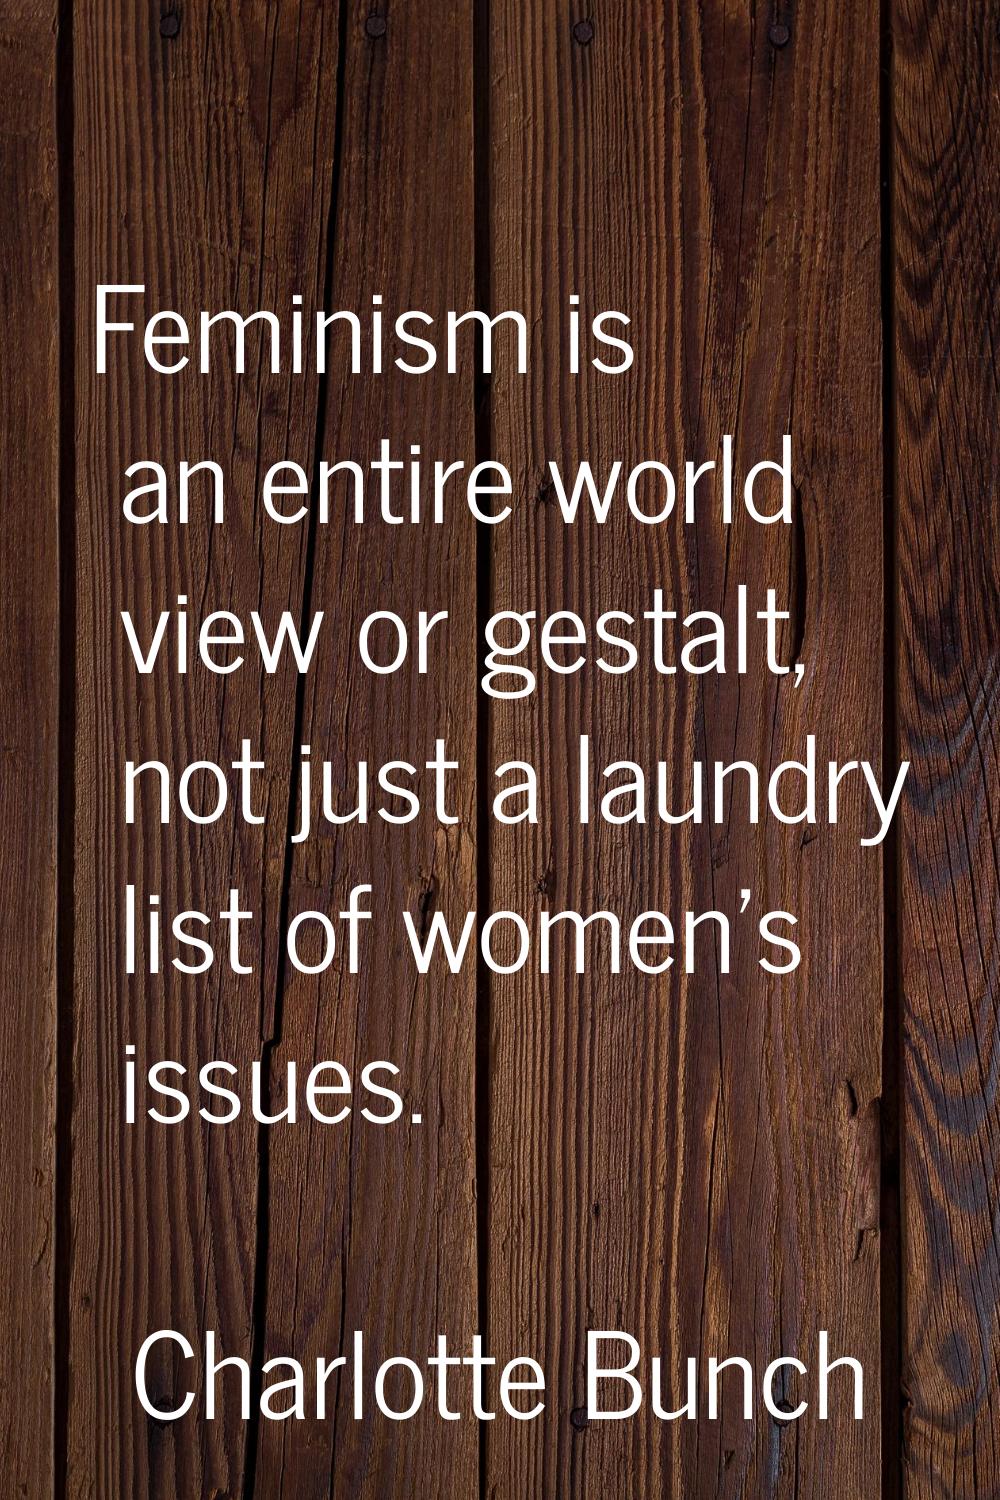 Feminism is an entire world view or gestalt, not just a laundry list of women's issues.